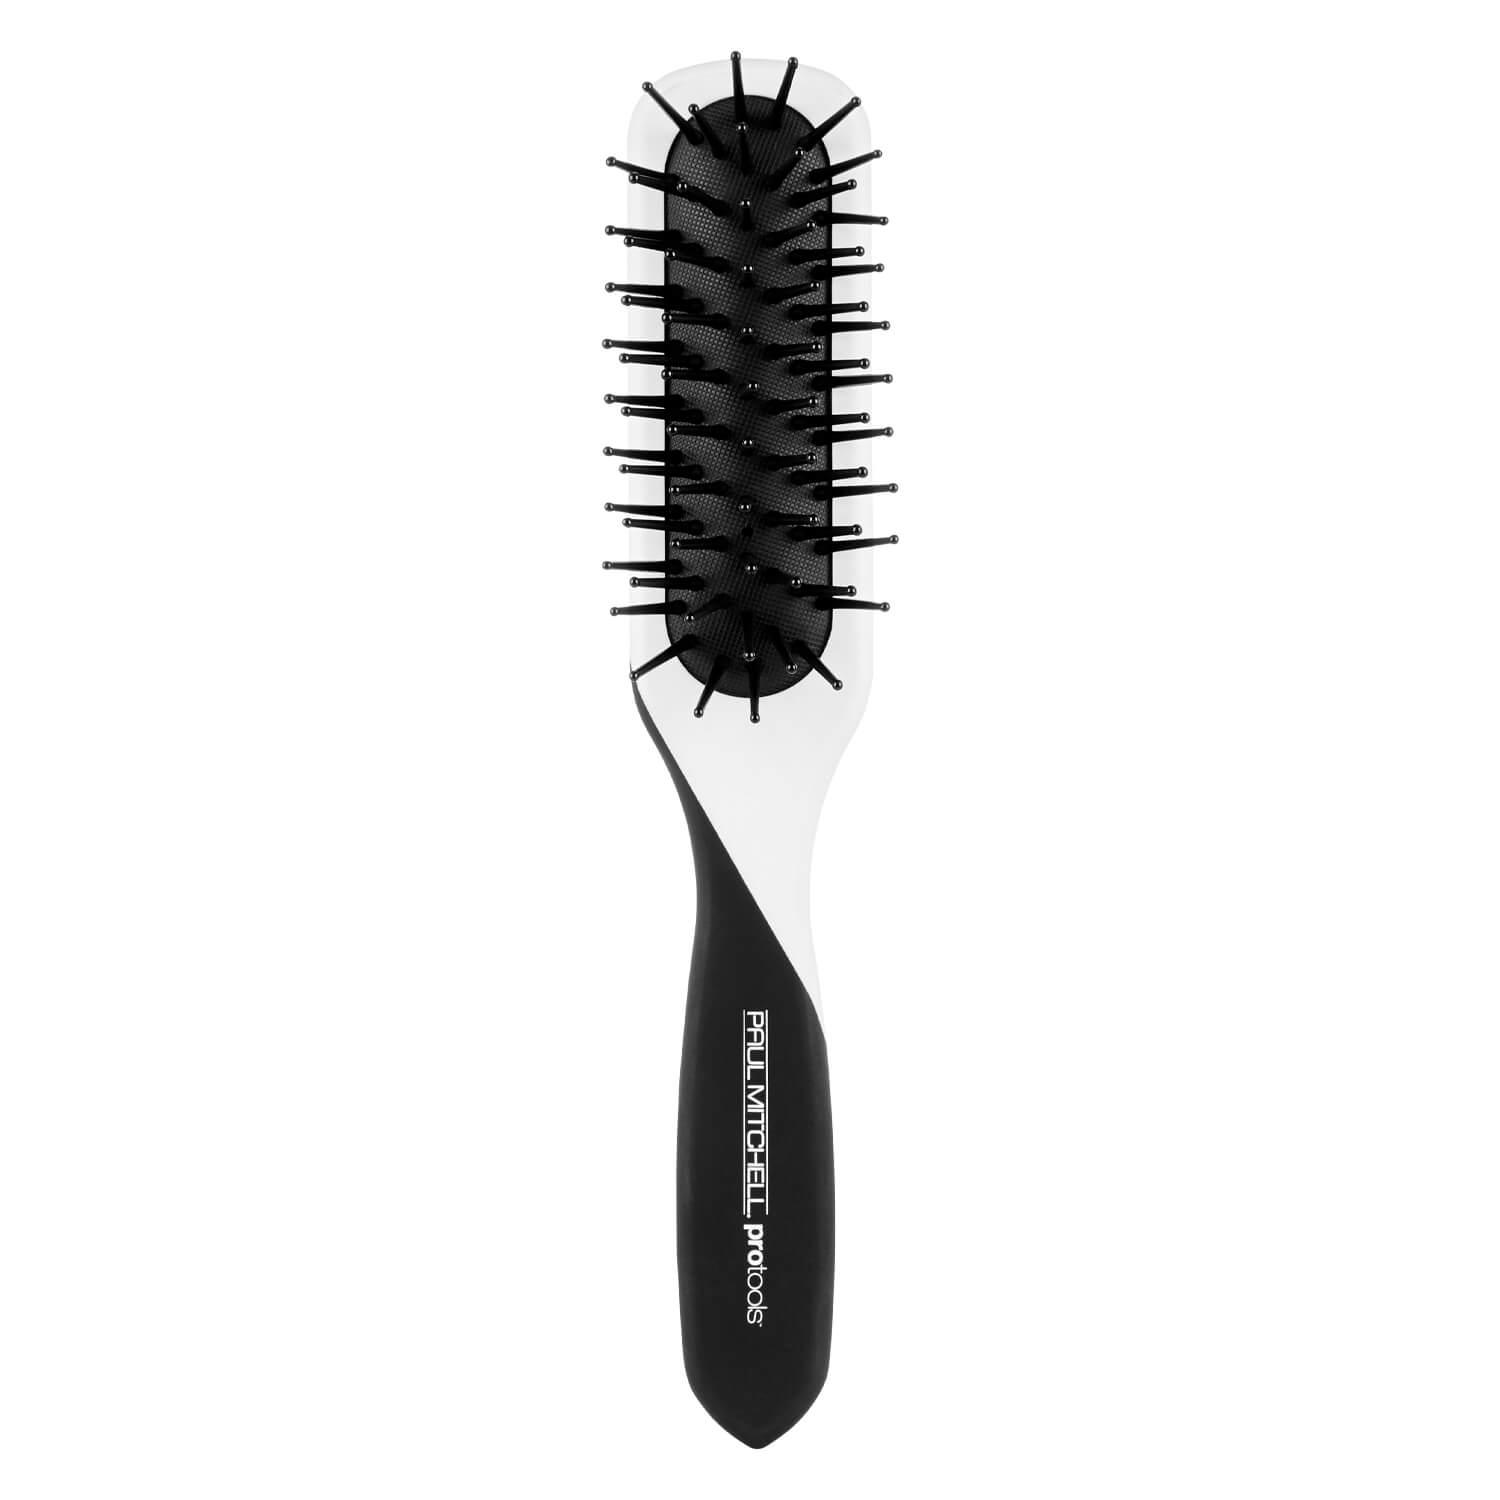 Paul Mitchell Tools - Sculpting Brush 413 Limited Edition